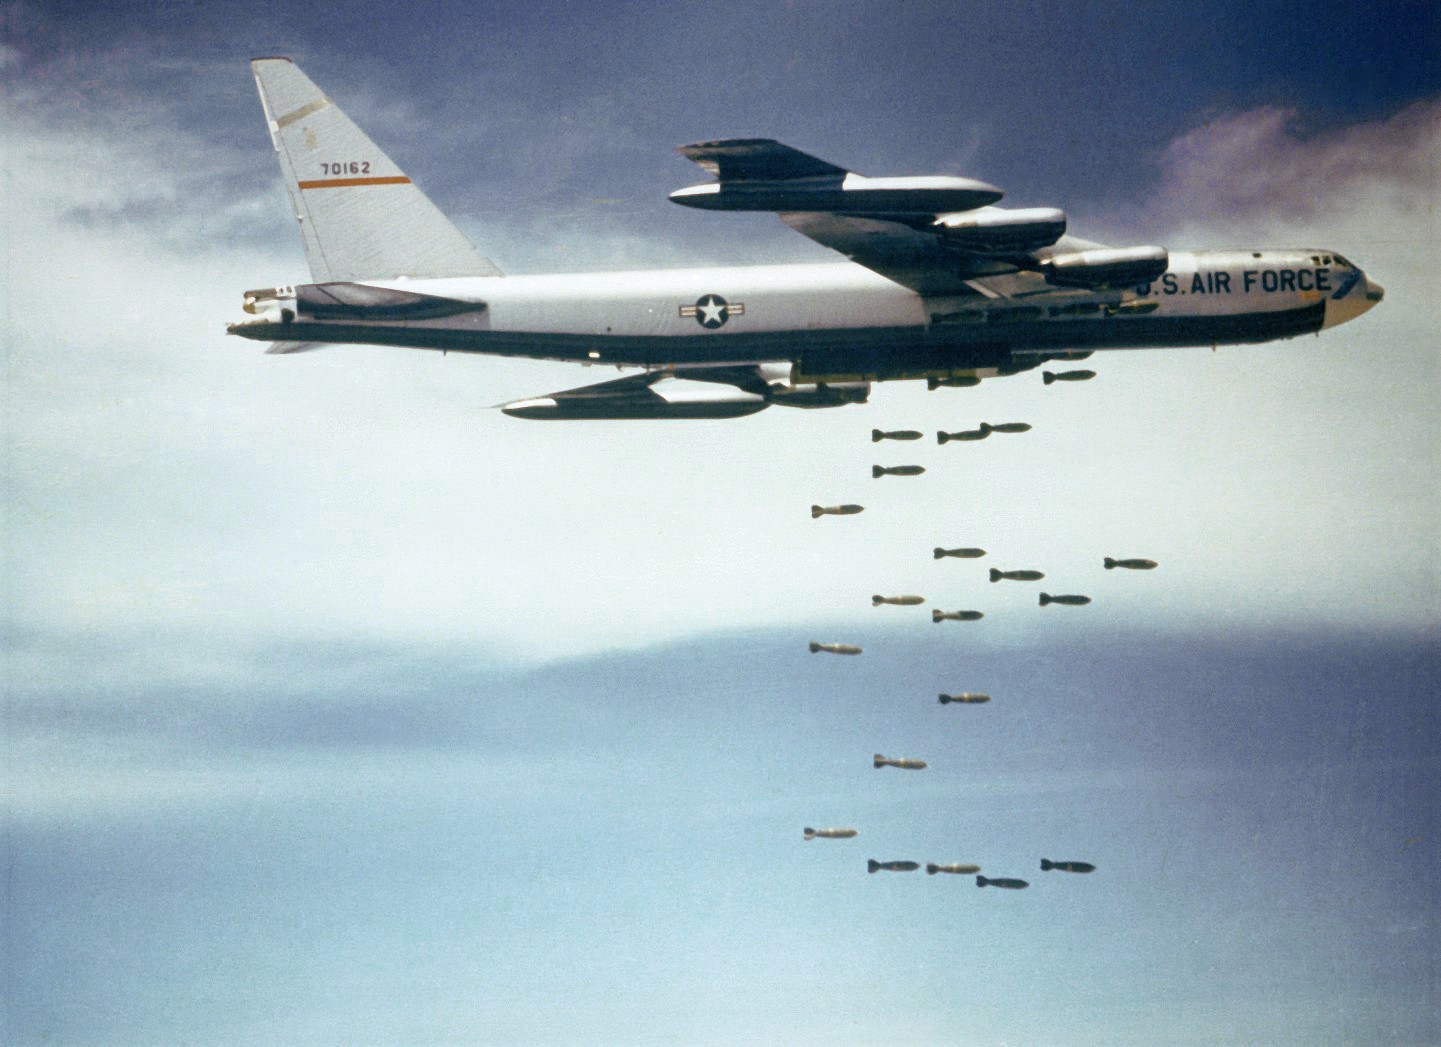 http://vignette1.wikia.nocookie.net/future/images/c/c3/Boeing_B-52_dropping_bombs.jpg/revision/latest?cb=20150211182139